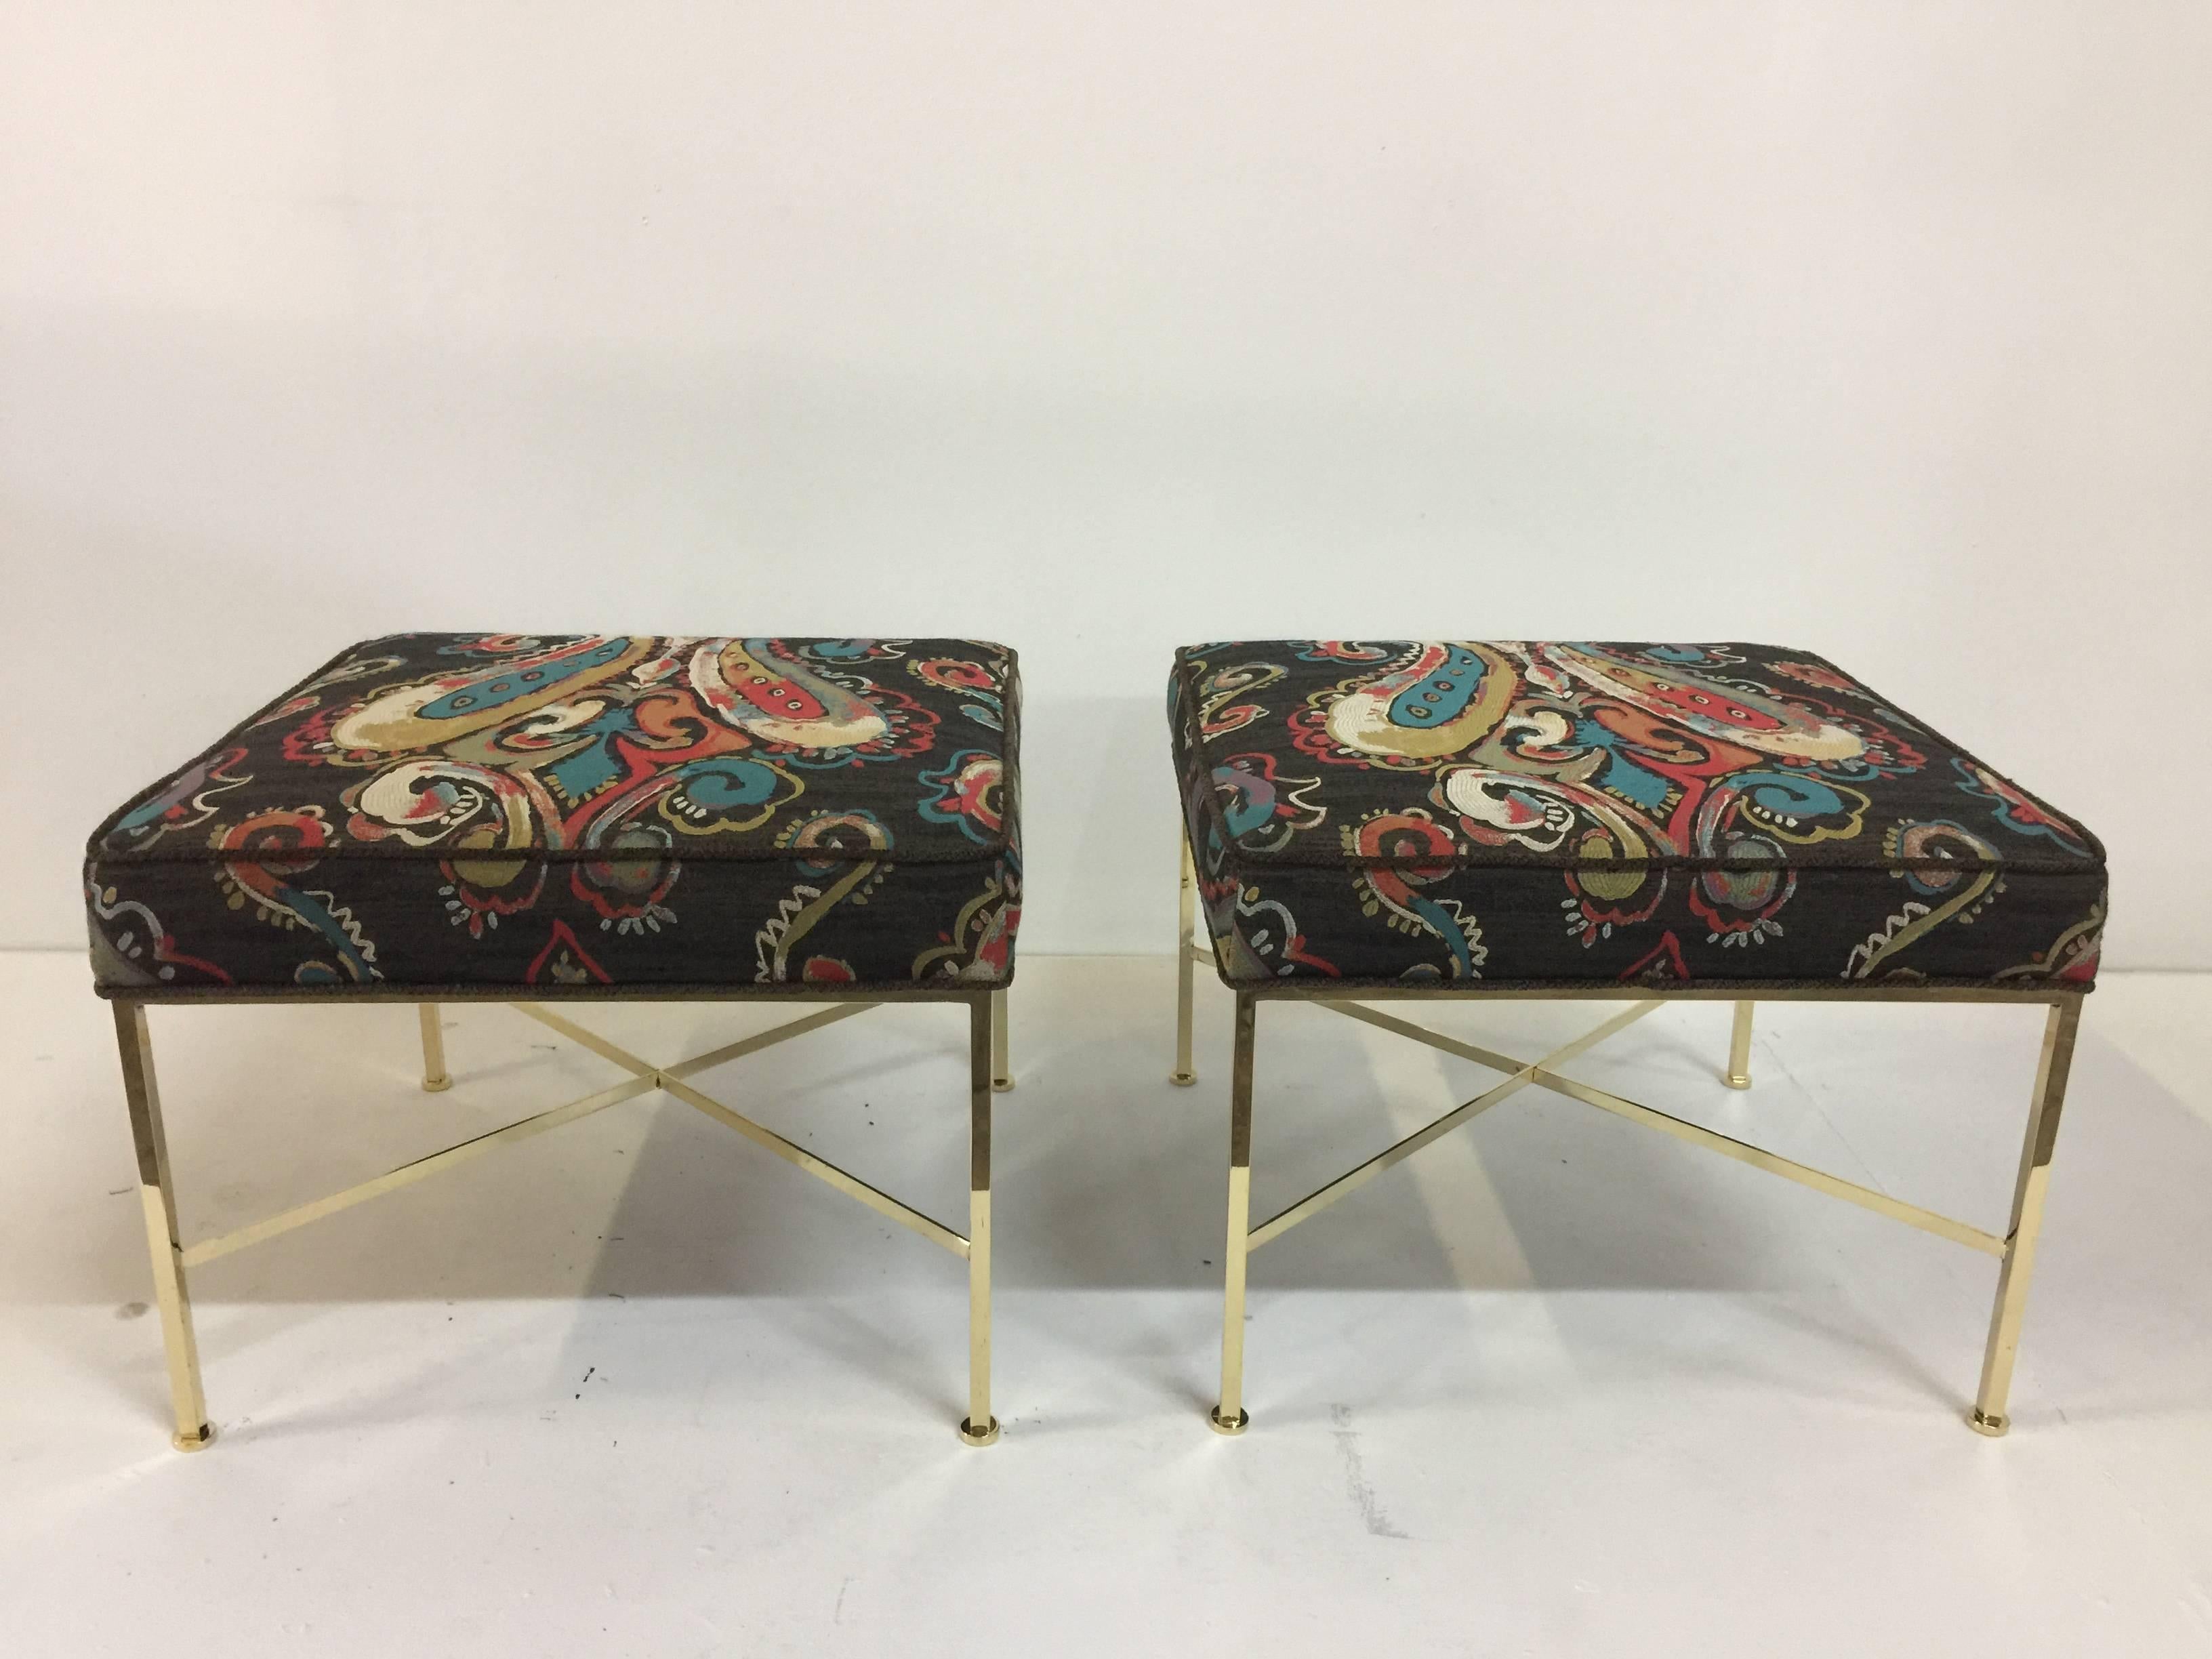 McCobb stools are perfect for additional seating. Restored with this rich and elegant paisley fabric wool or cotton blend. Polished to perfection and ready to use!